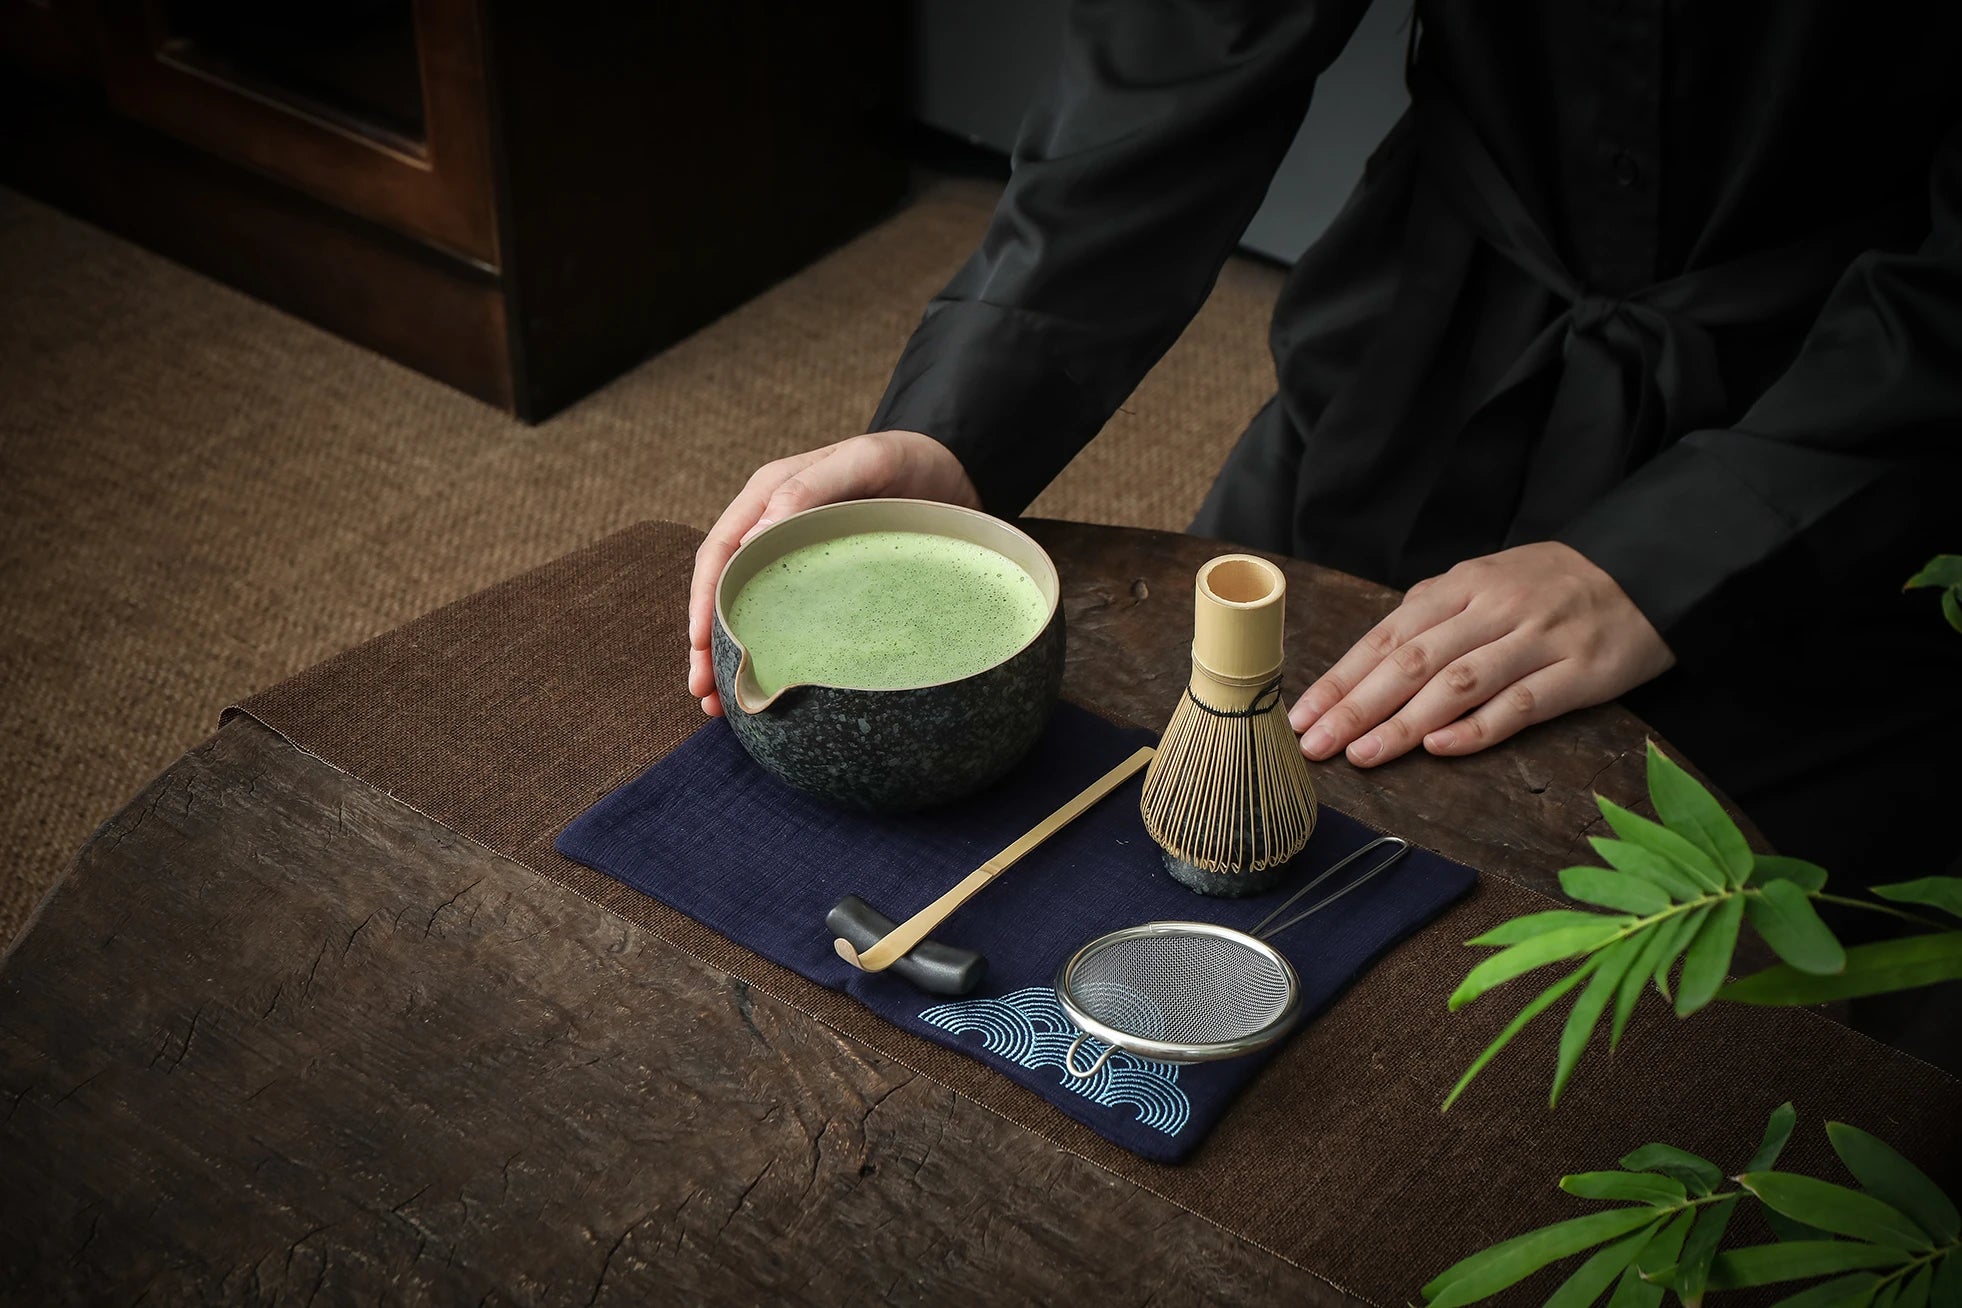 https://cdn.shopify.com/s/files/1/0330/5917/6493/files/14_Japanese_Ceramic_Matcha_Bowl_Traditional_Ceremonial_Accessories_Matcha_Chawan_with_Whisk_Rest_K17.webp?v=1665366307